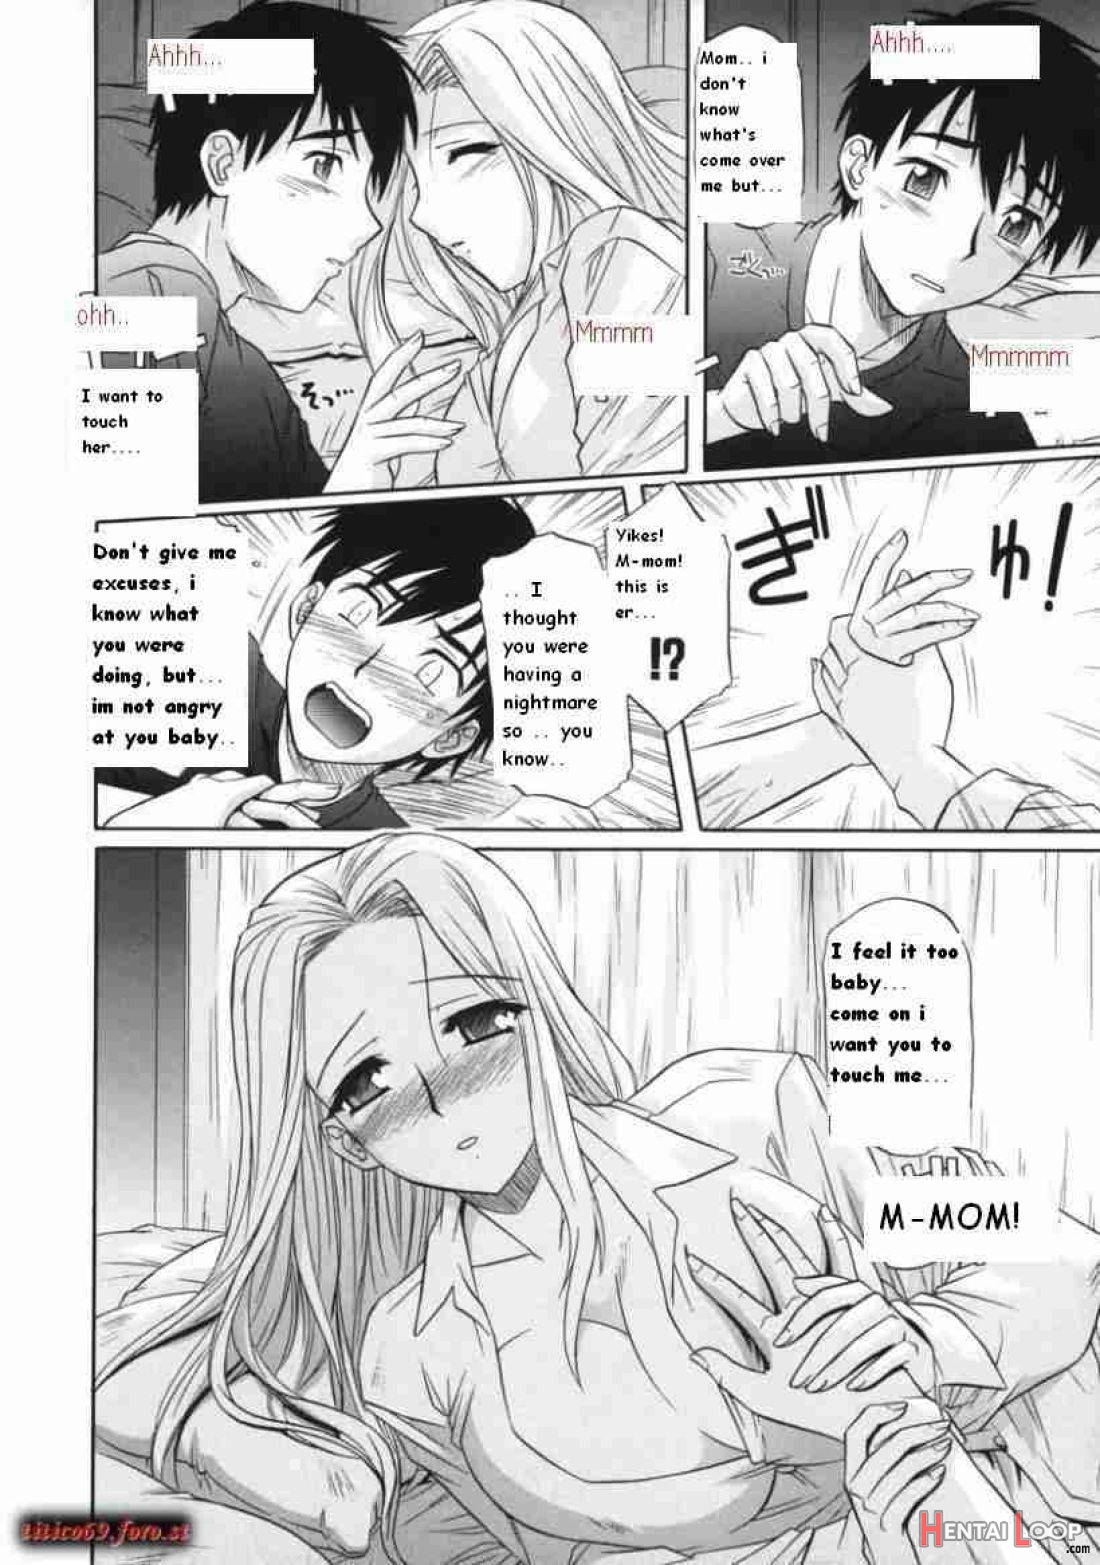 Taking Care of Mom page 4